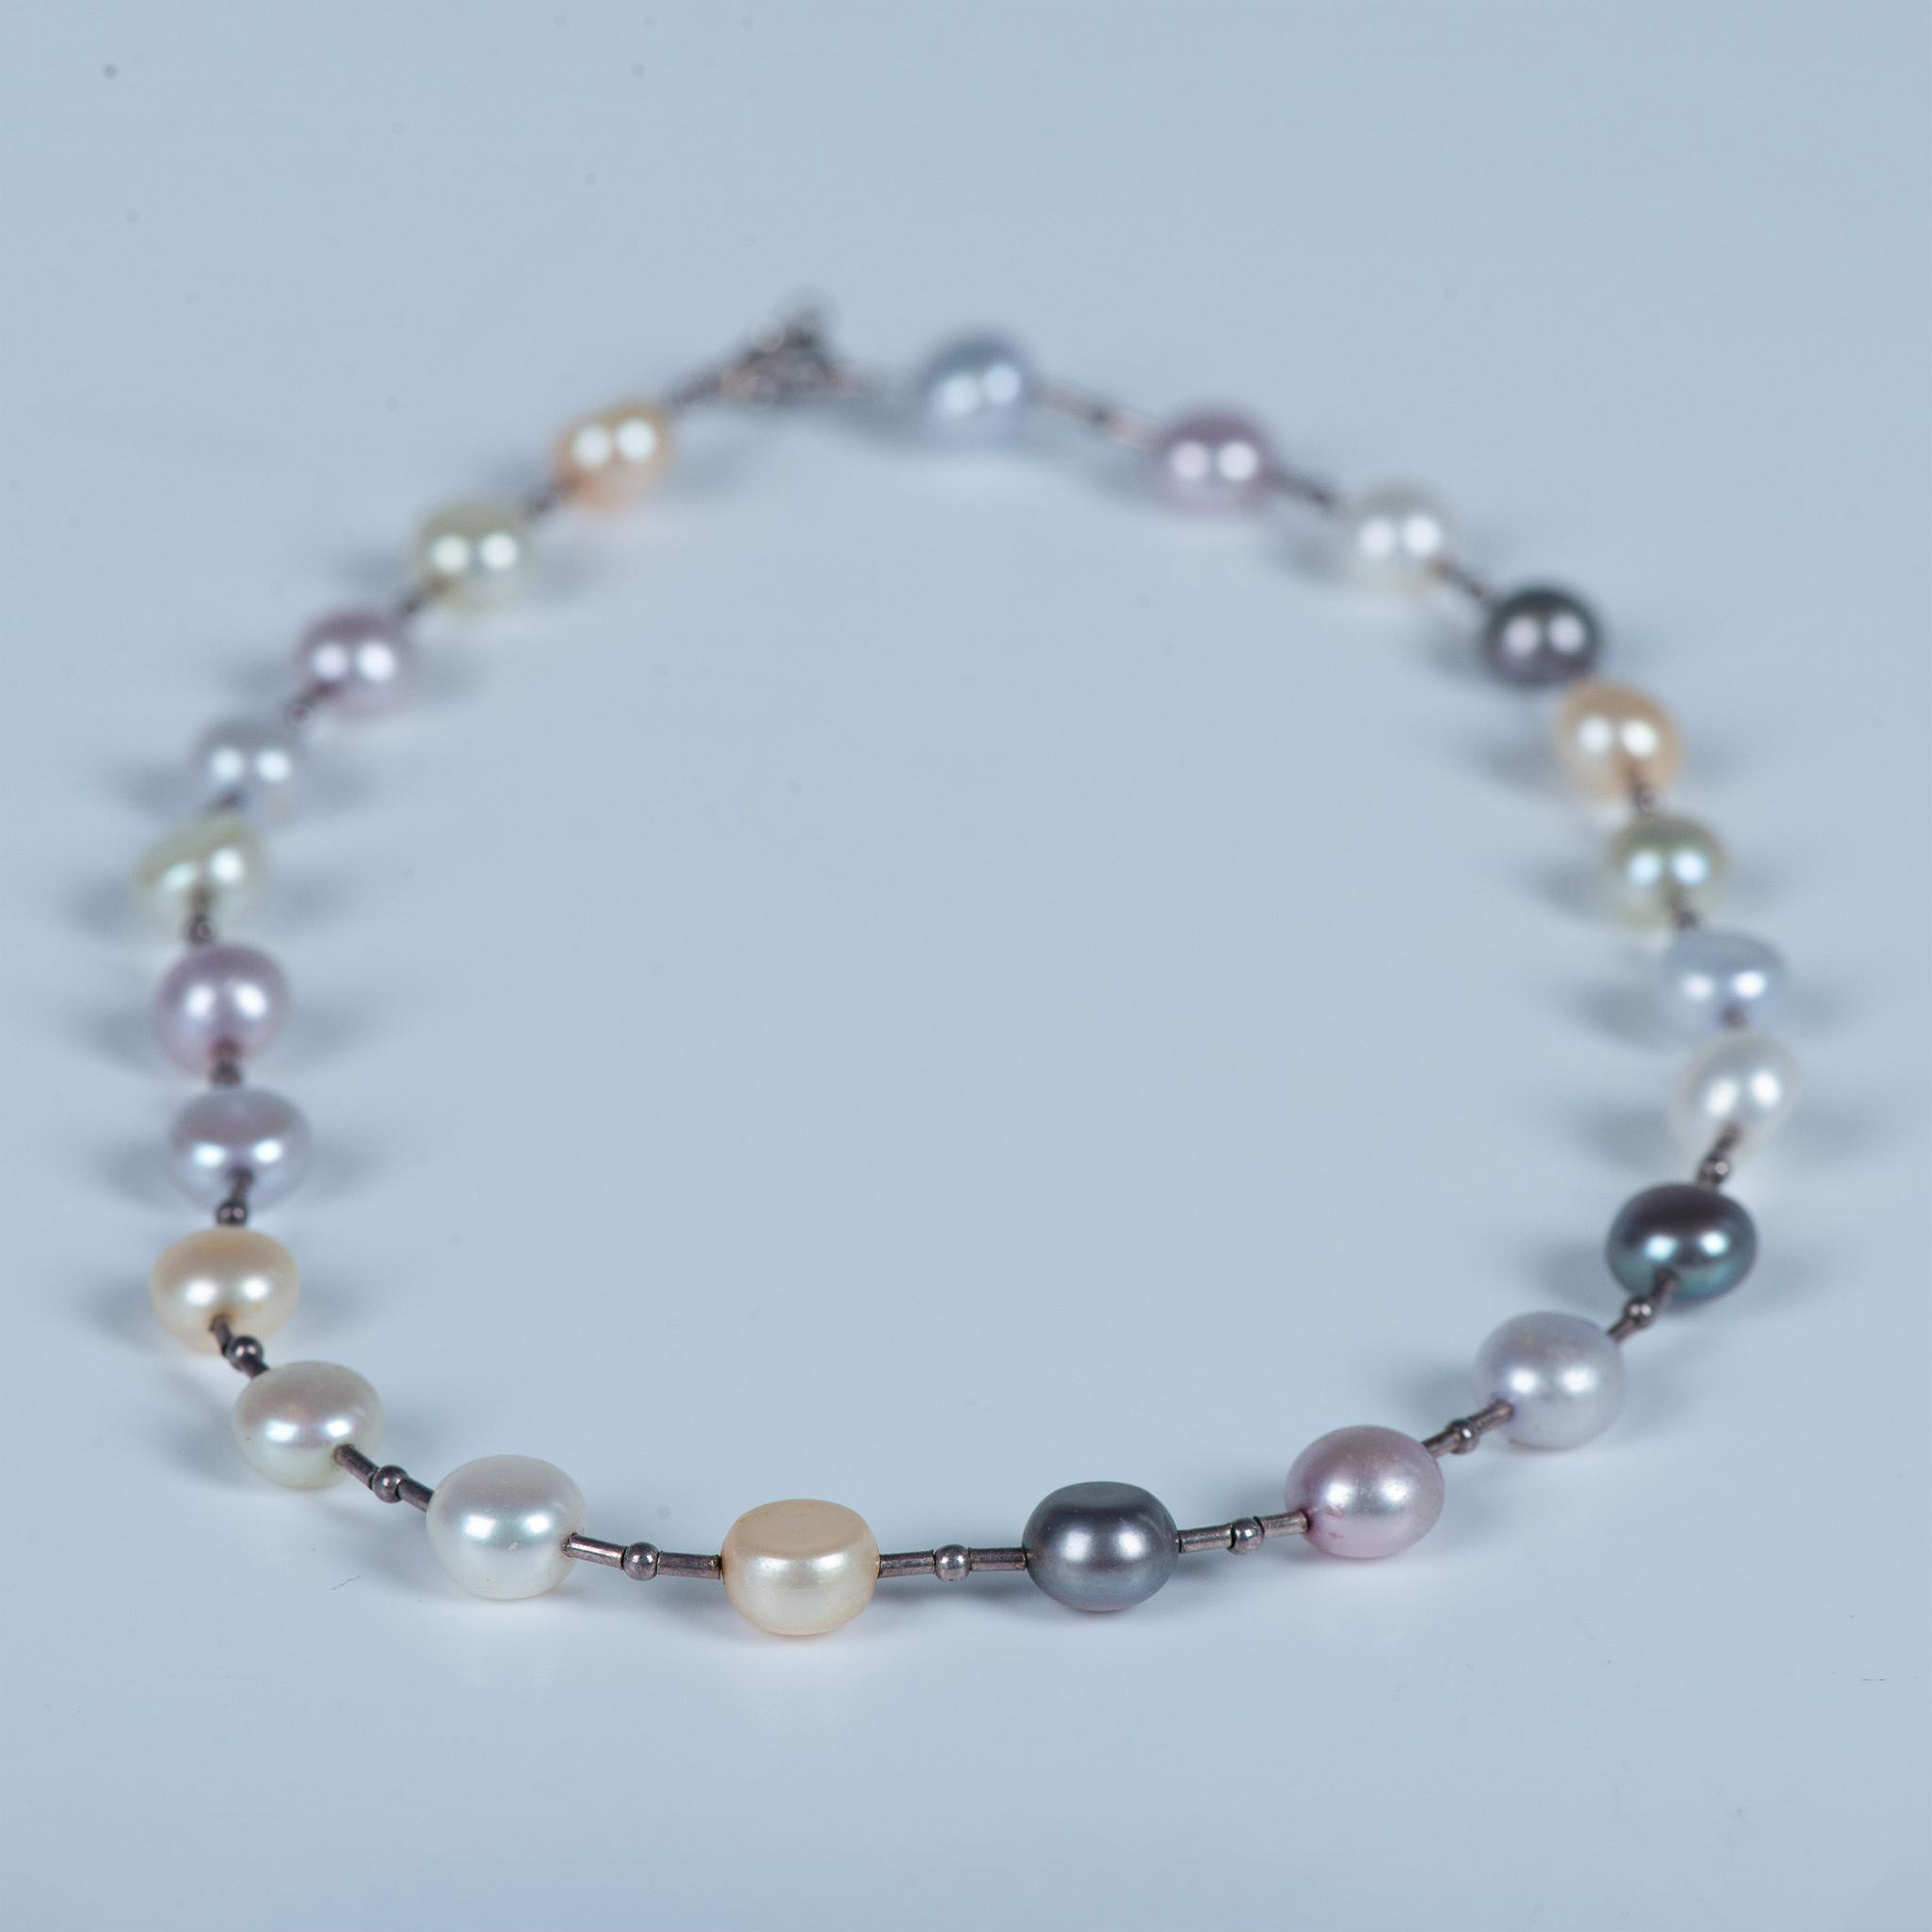 Gorgeous Sterling Silver and Multicolored Pearl Necklace - Image 3 of 3